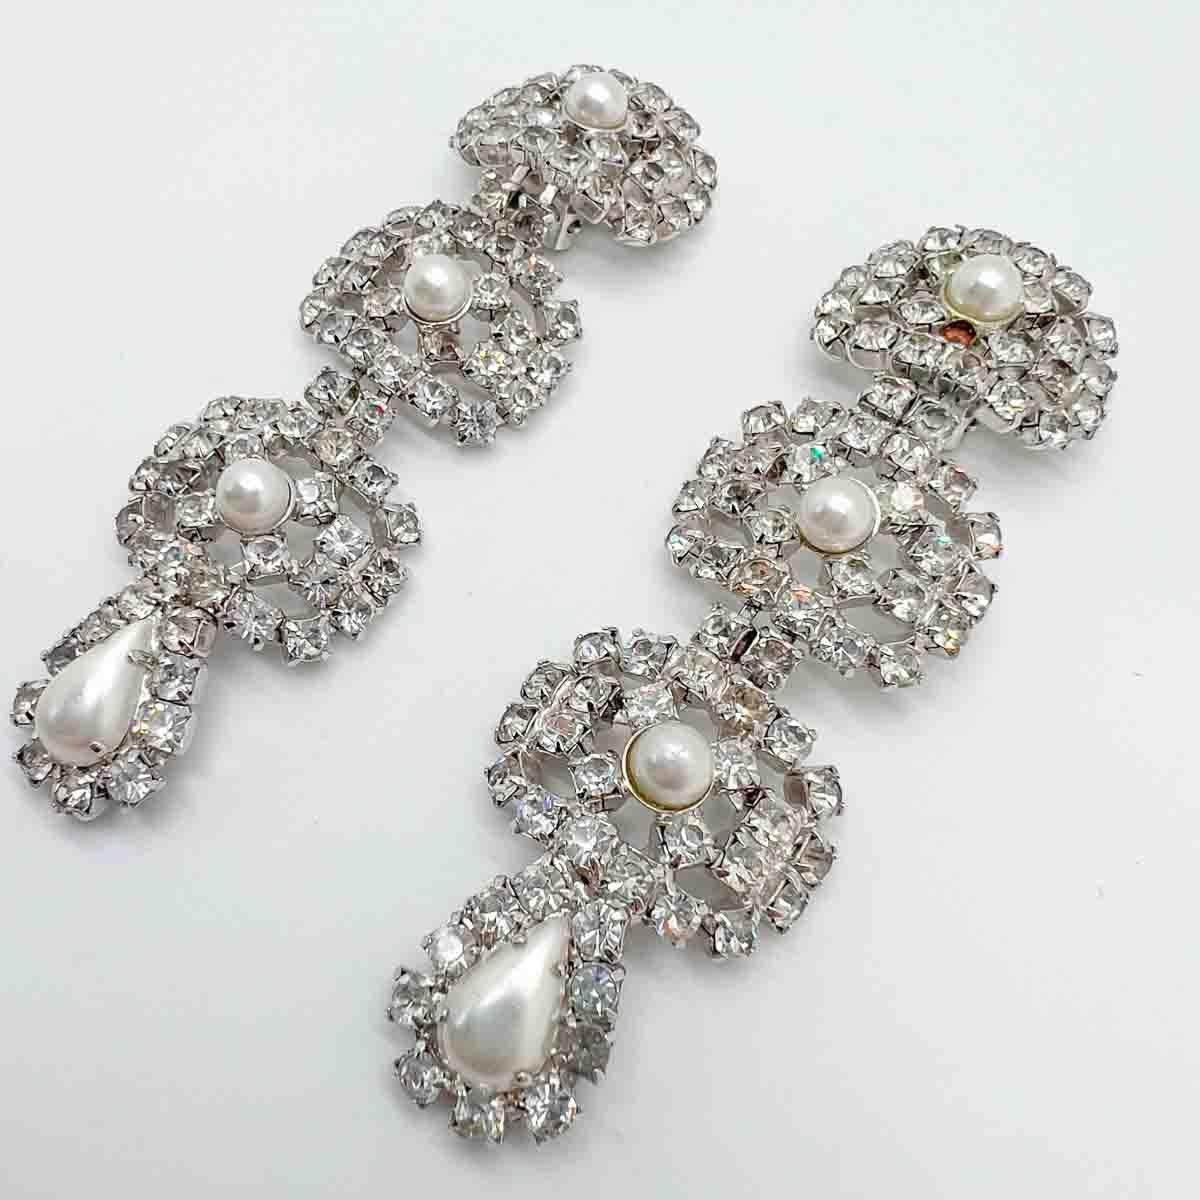 A pair of Vintage Crystal & Pearl Drop Earrings. A dreamy combo embodying the diamond and pearl look. Most likely a couture creation, although unsigned, these exceptional beauties will prove the ultimate chic adornment.


An unsigned beauty. A rare